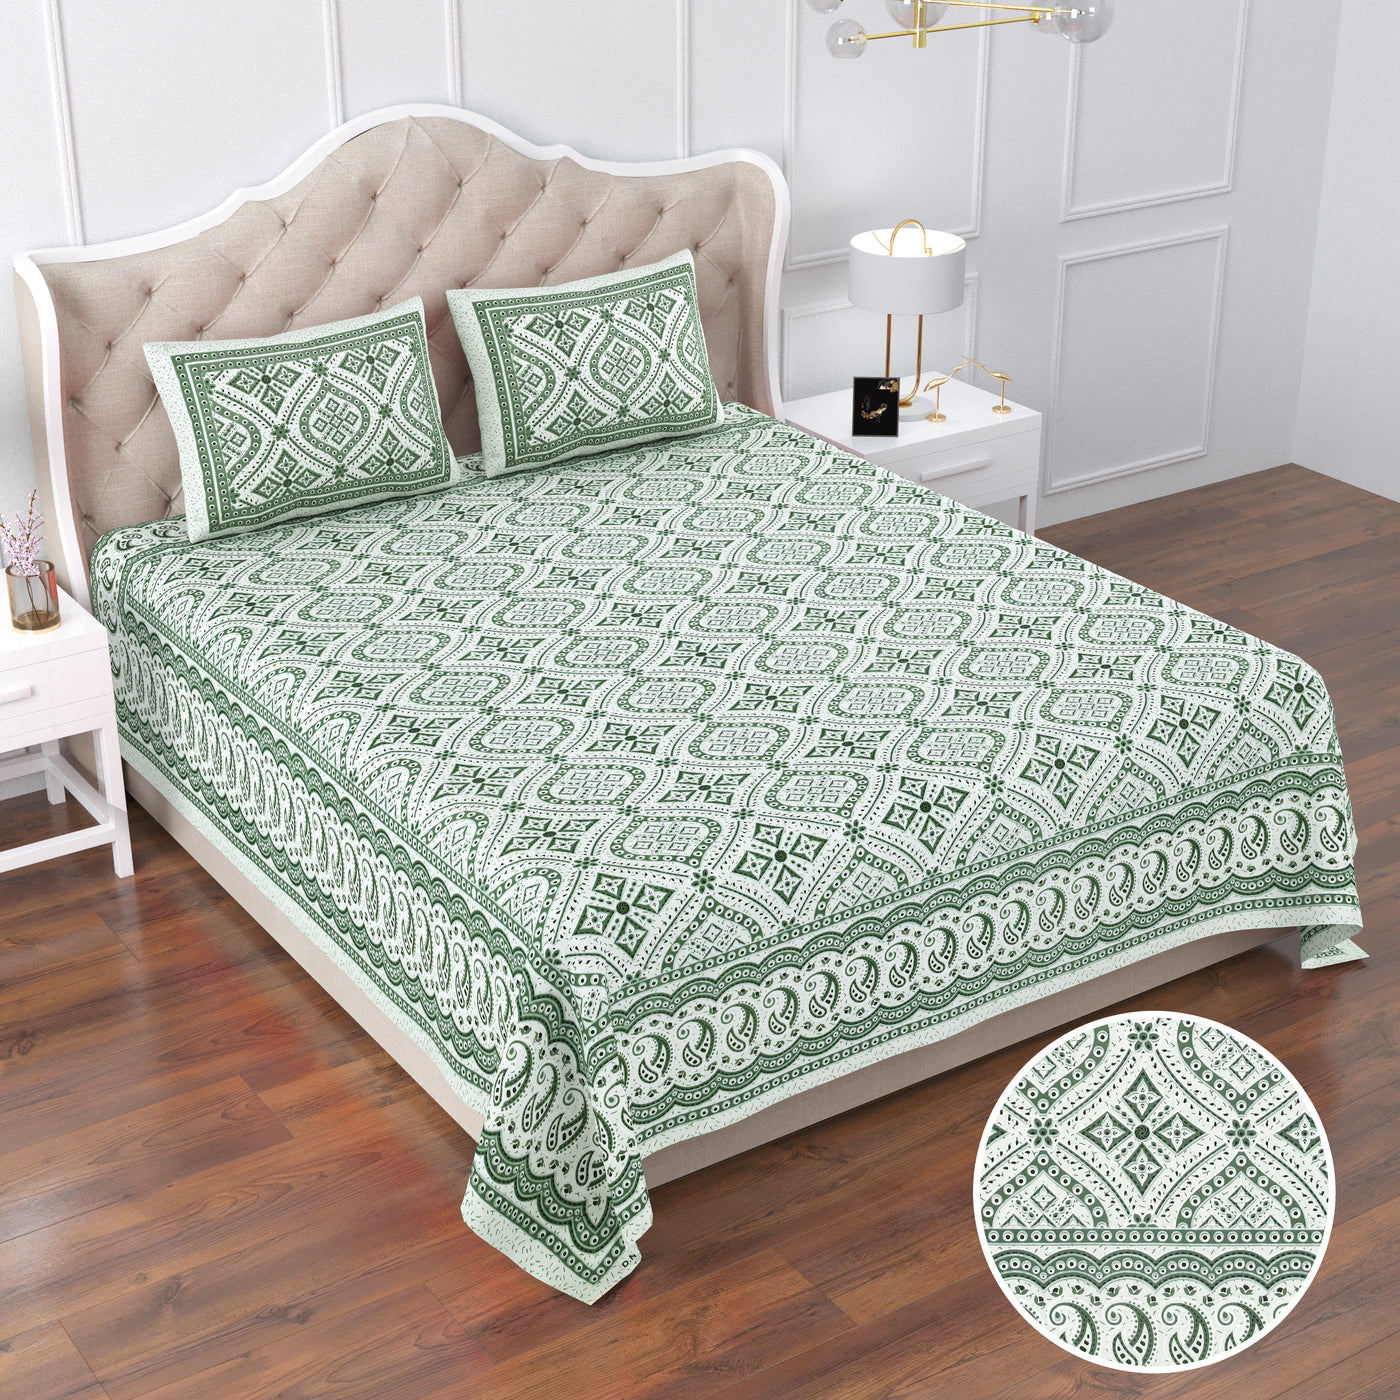 Greeny Grass Cotton Printed Double Bed Sheet With 2 Pillow Covers